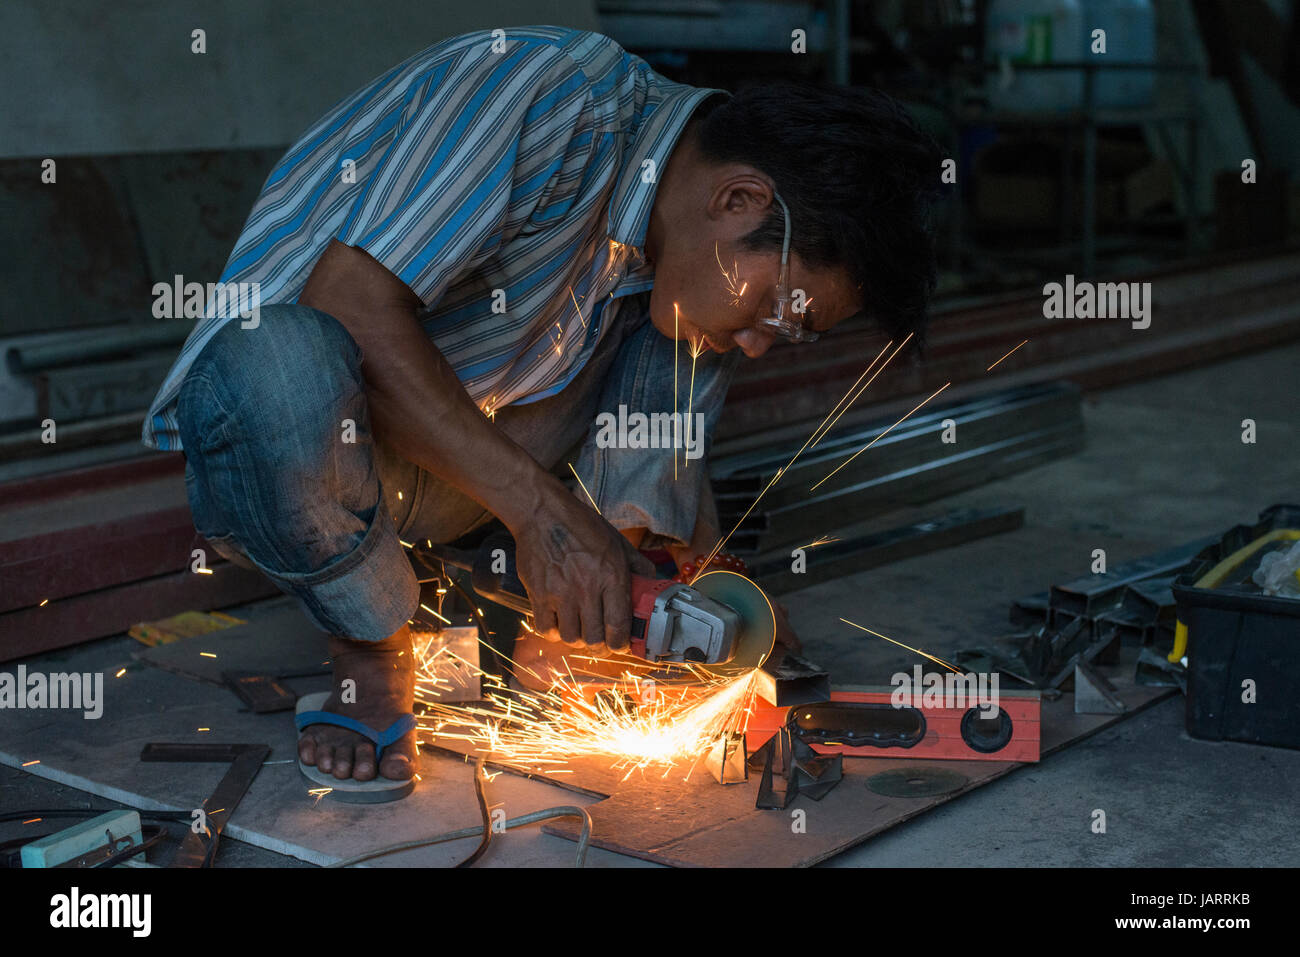 An Industrial worker uses an angle grinder at his place of work at Hpa-an, Myanmar (Burma) Stock Photo